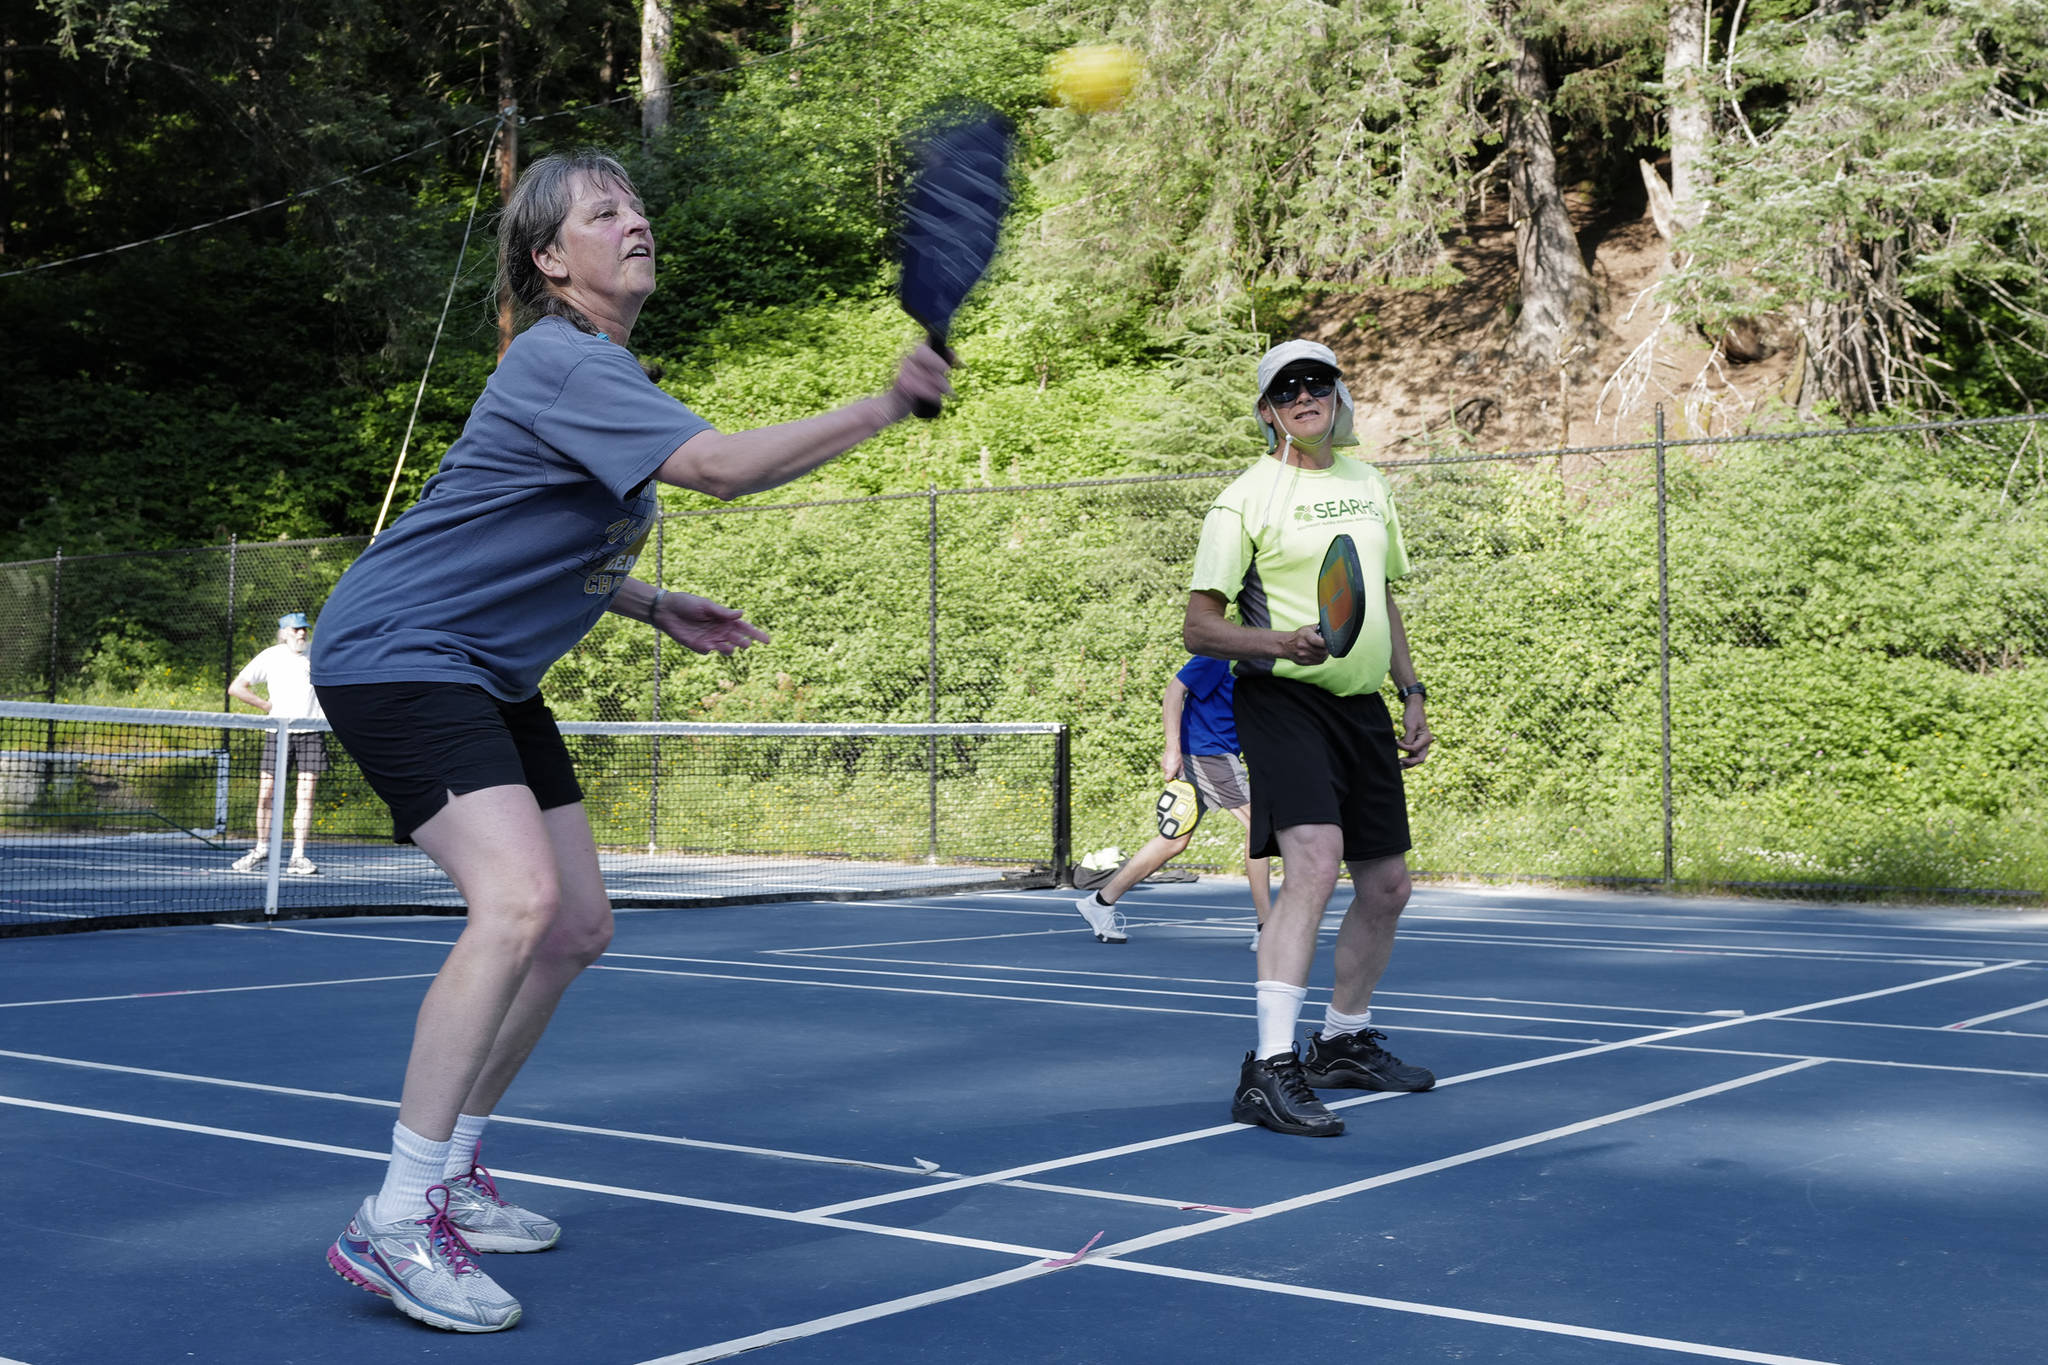 Christi Herrea plays the ball as teammate David Job watches during a pickleball match at the Cope Park tennis courts on Wednesday, June 26, 2019. (Michael Penn | Juneau Empire)